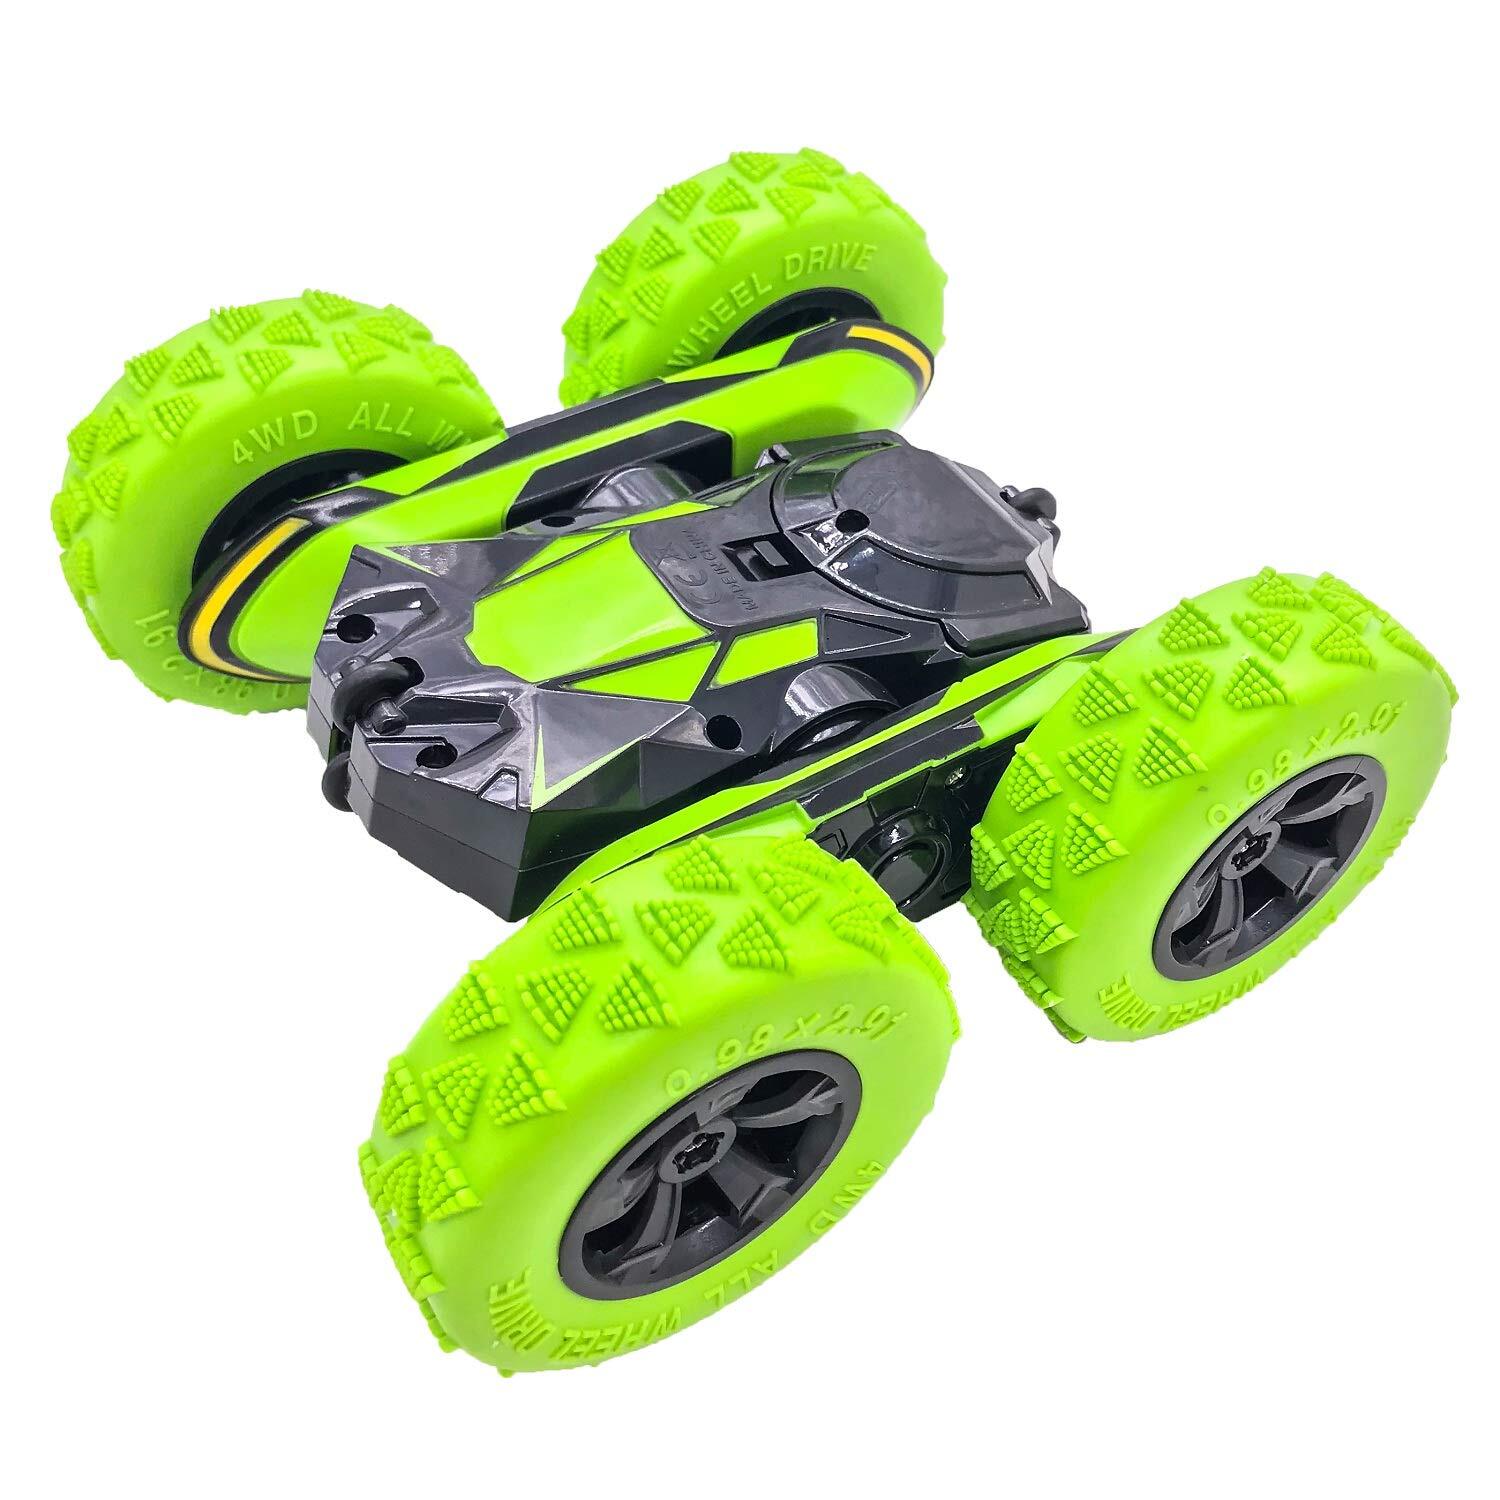 360 degrees rotary remote control stunt car